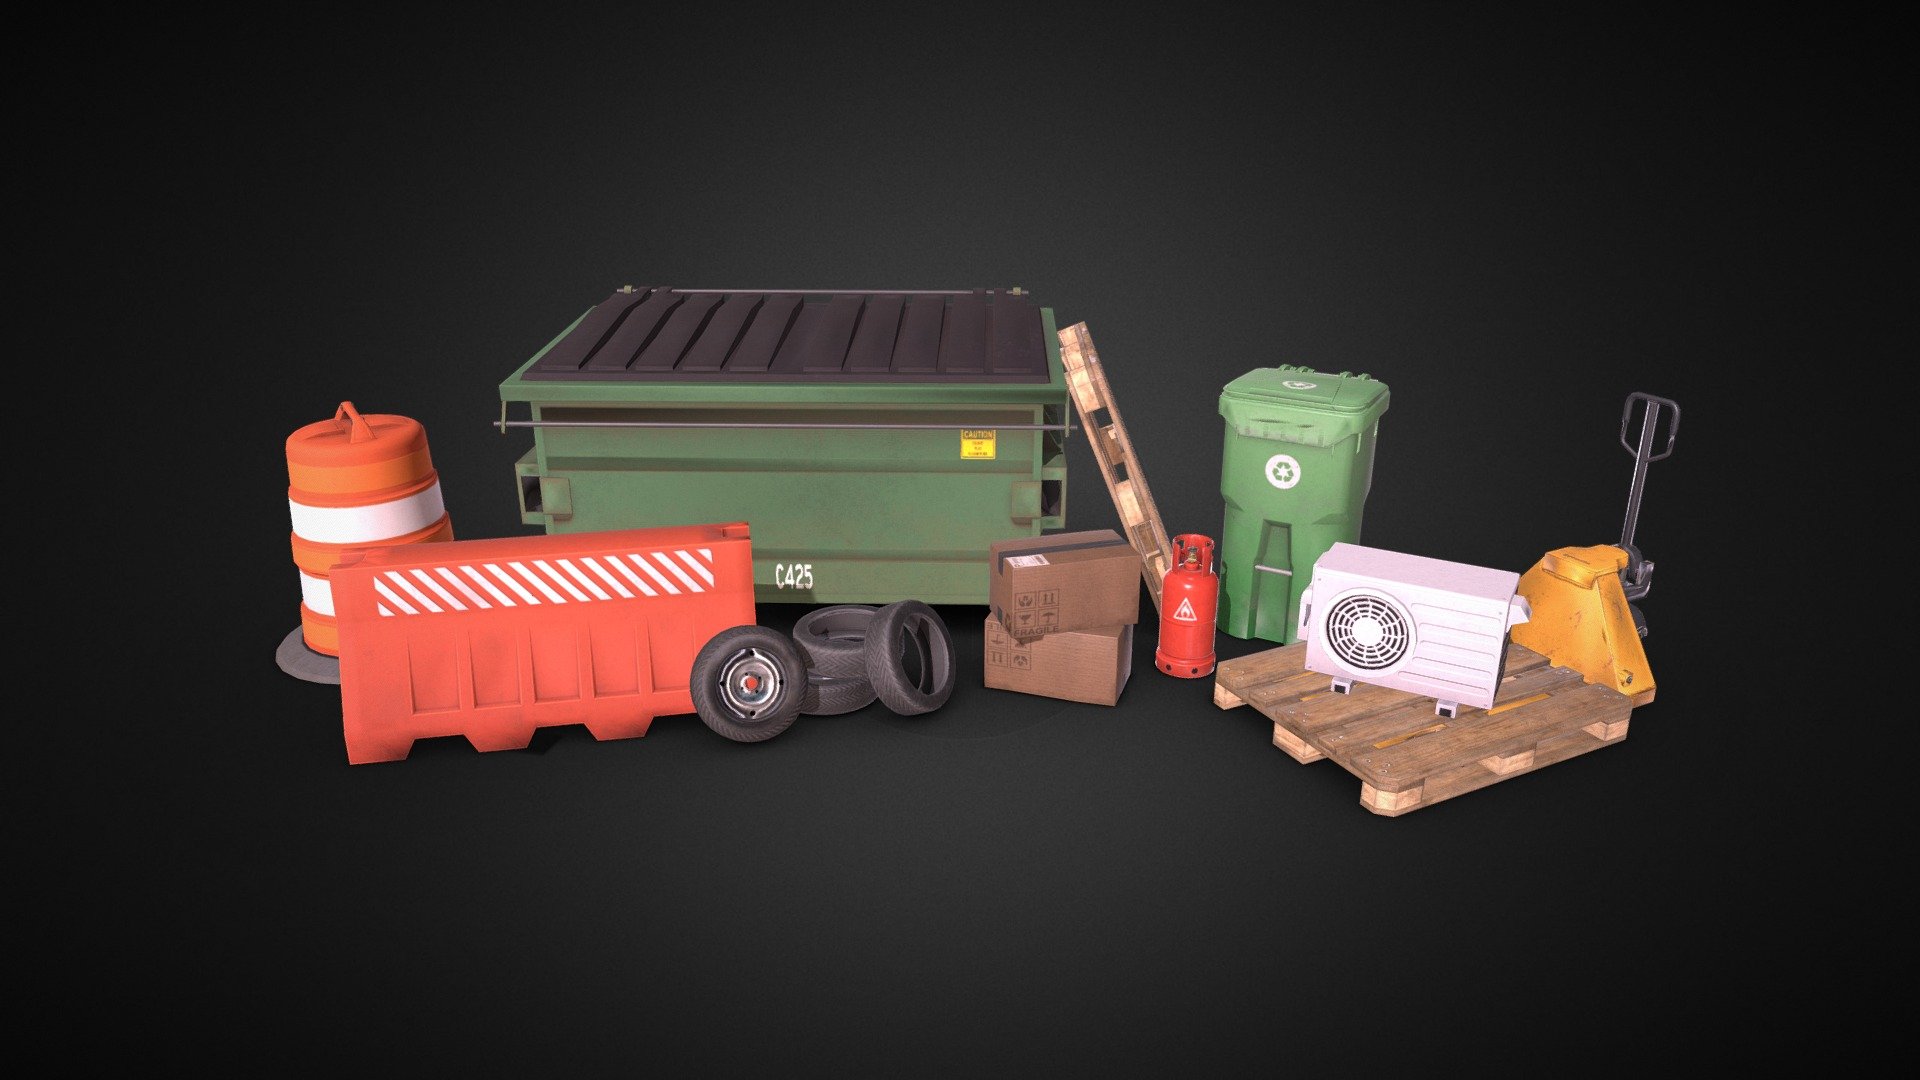 3D Low Poly Urban Props:


AC
Dumpster
Package
Pallet
Pallet Truck
Propane Tank
Traffic Cone
Traffic Barrier
Trash Bin
Wheels

PBR Materials With 2K Textures

Wireframe ⇩
 - Urban Props - 3D model by DB (@D_B_) 3d model